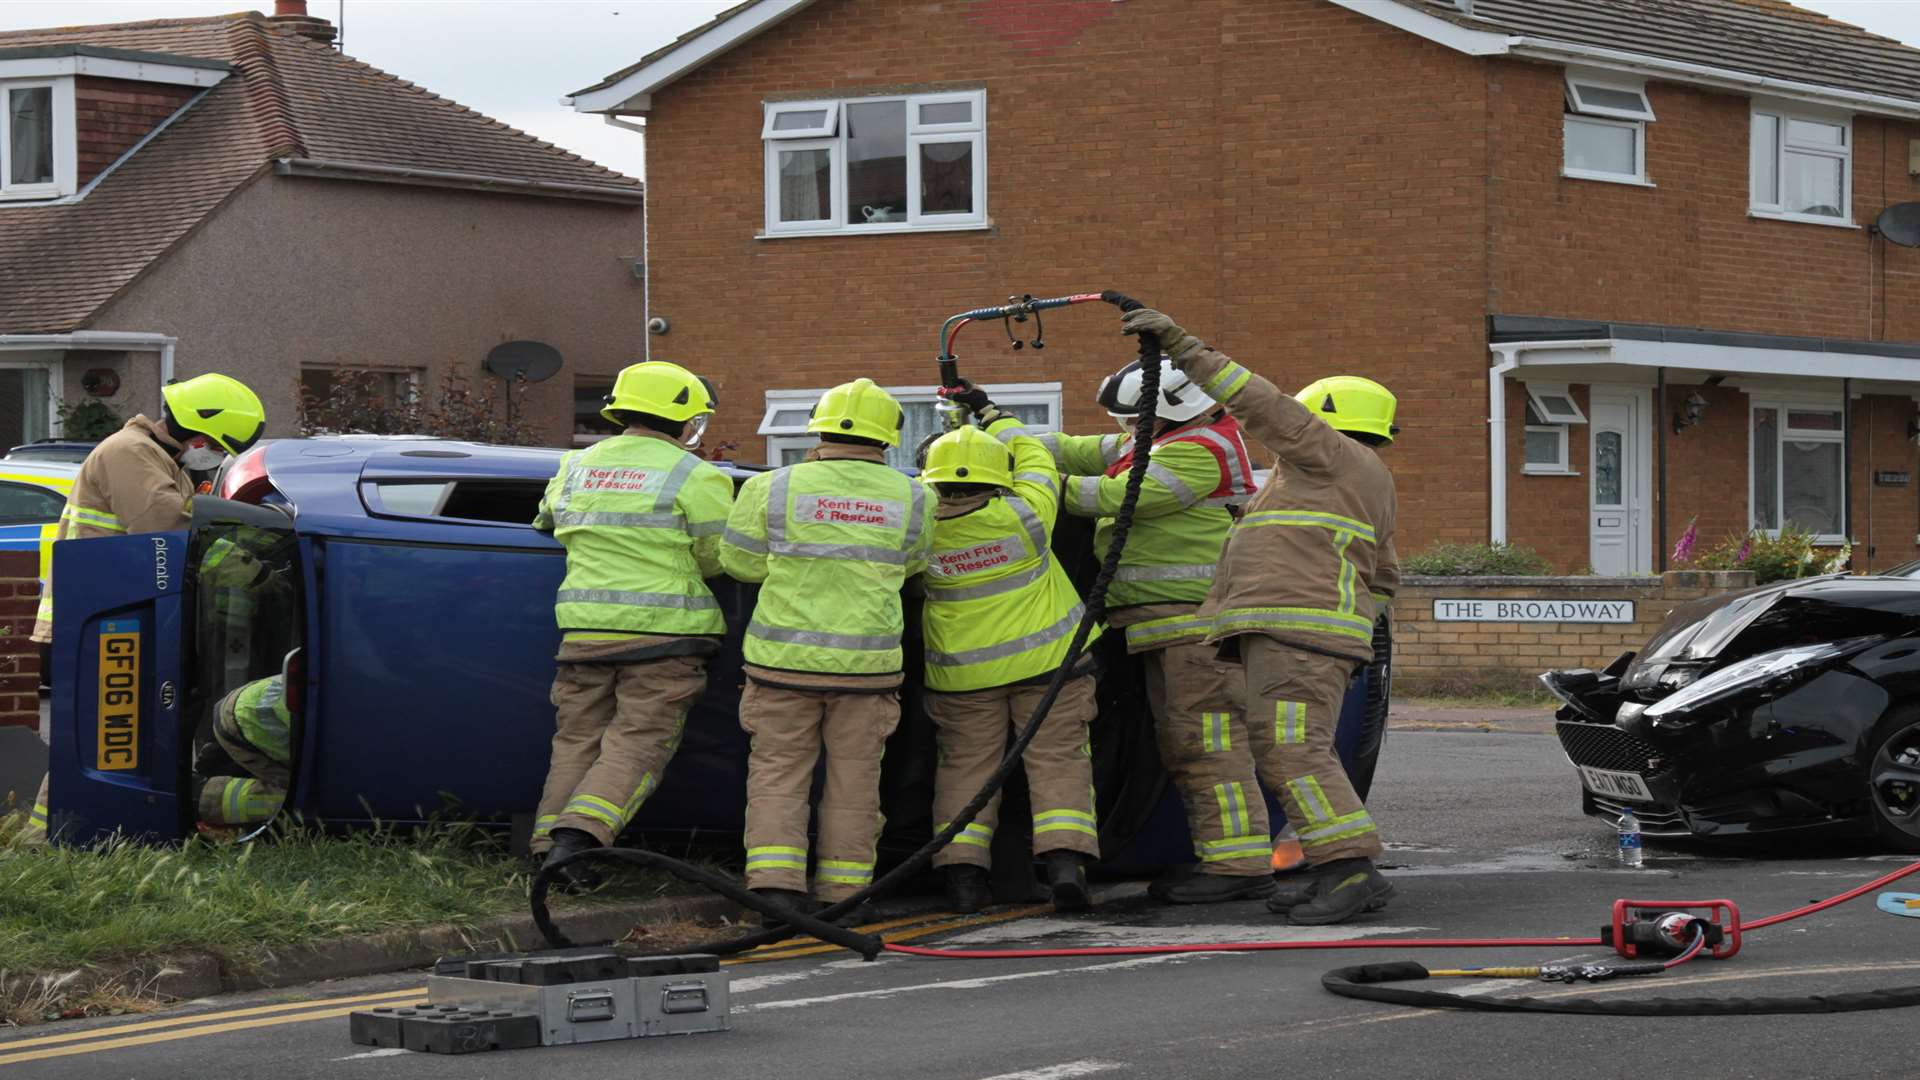 Firefighters removing the roof off one of the cars involved. Pictures: Geoff Gambrill